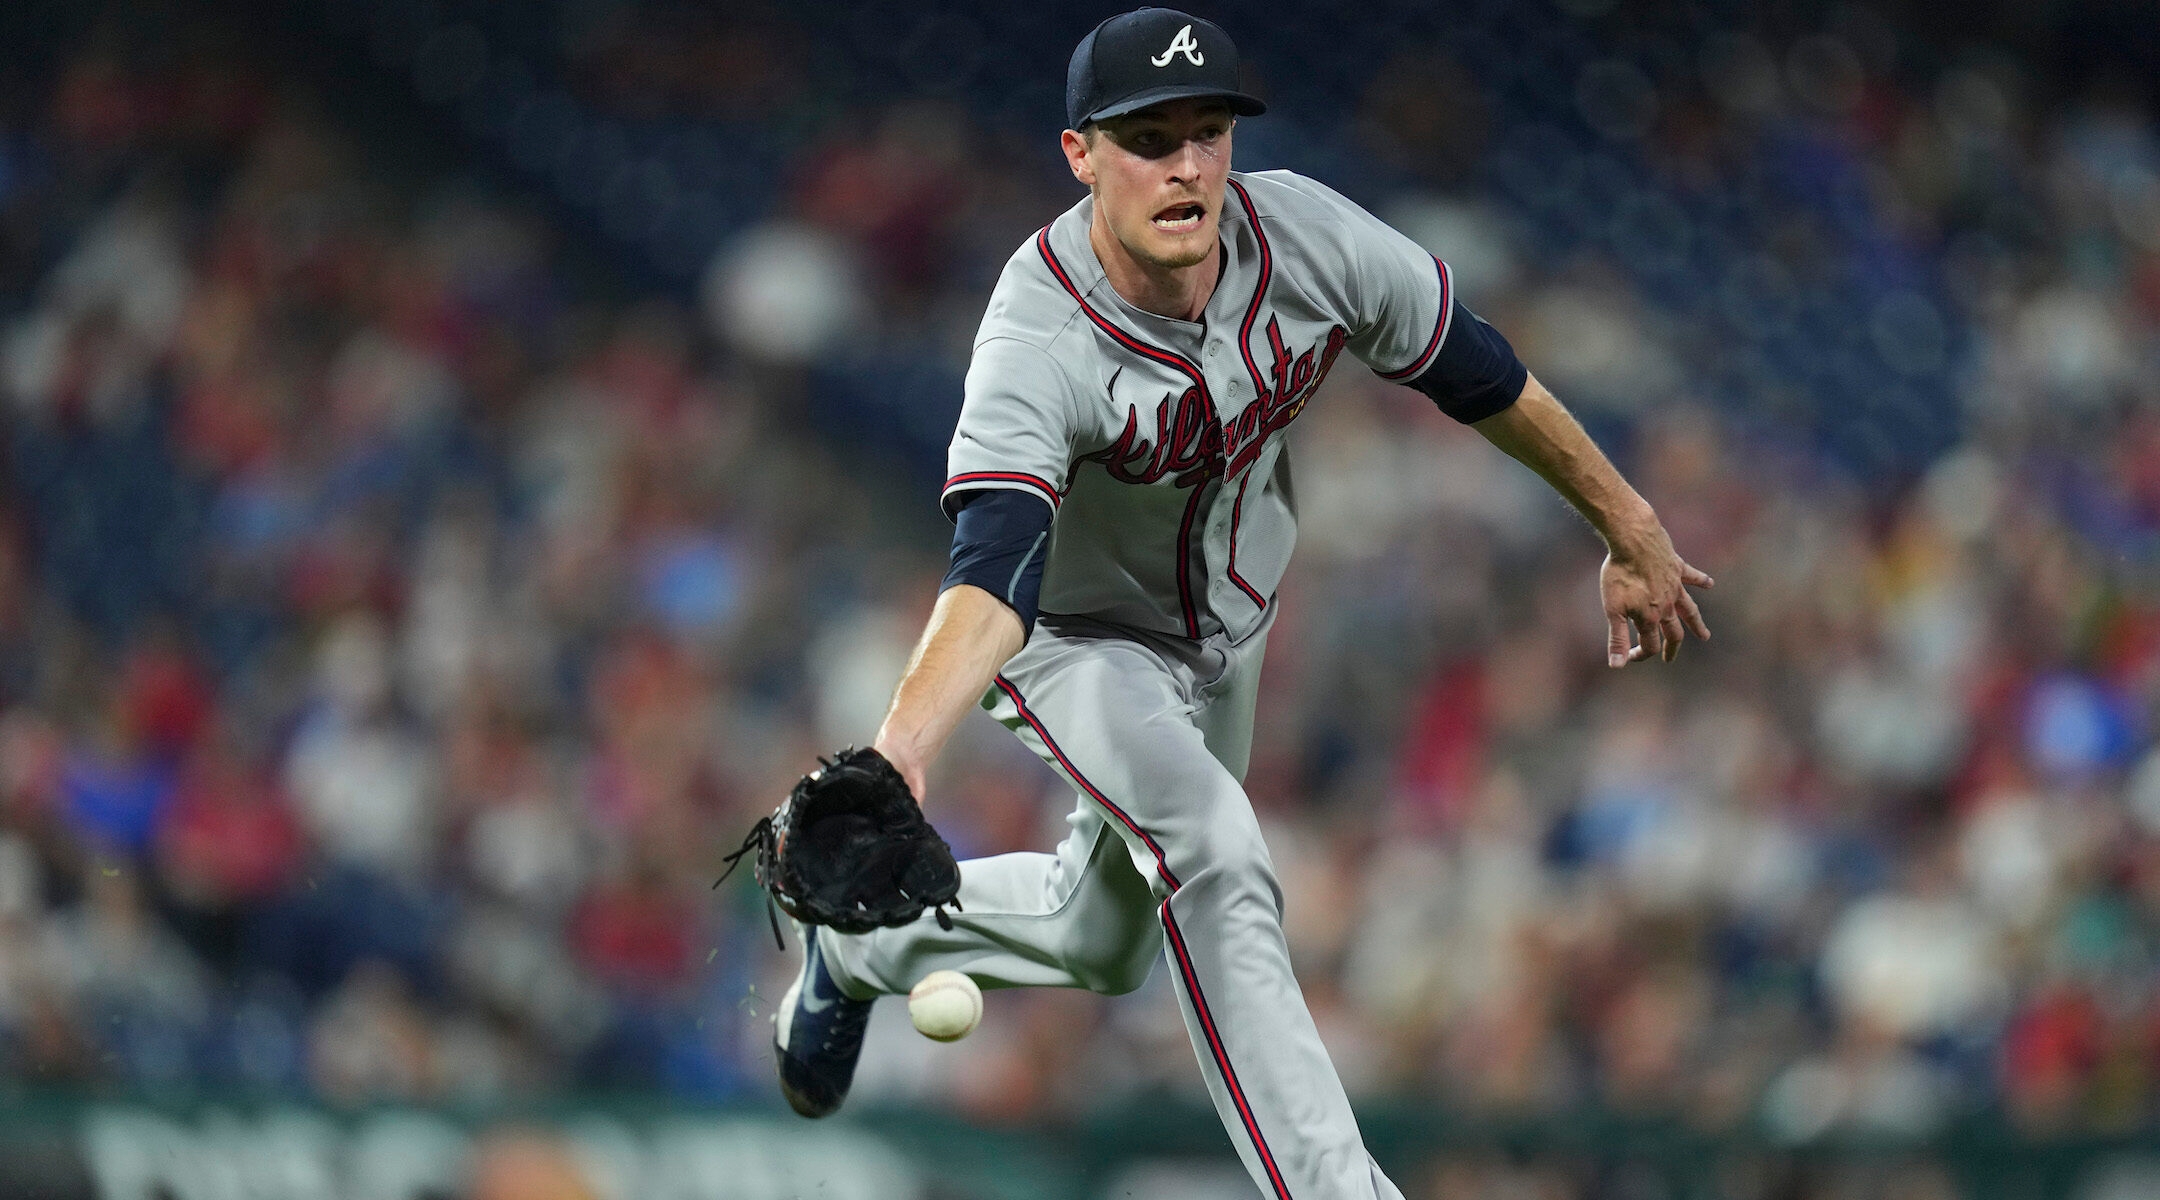 Monthly Awards Max Fried - Operation Sports